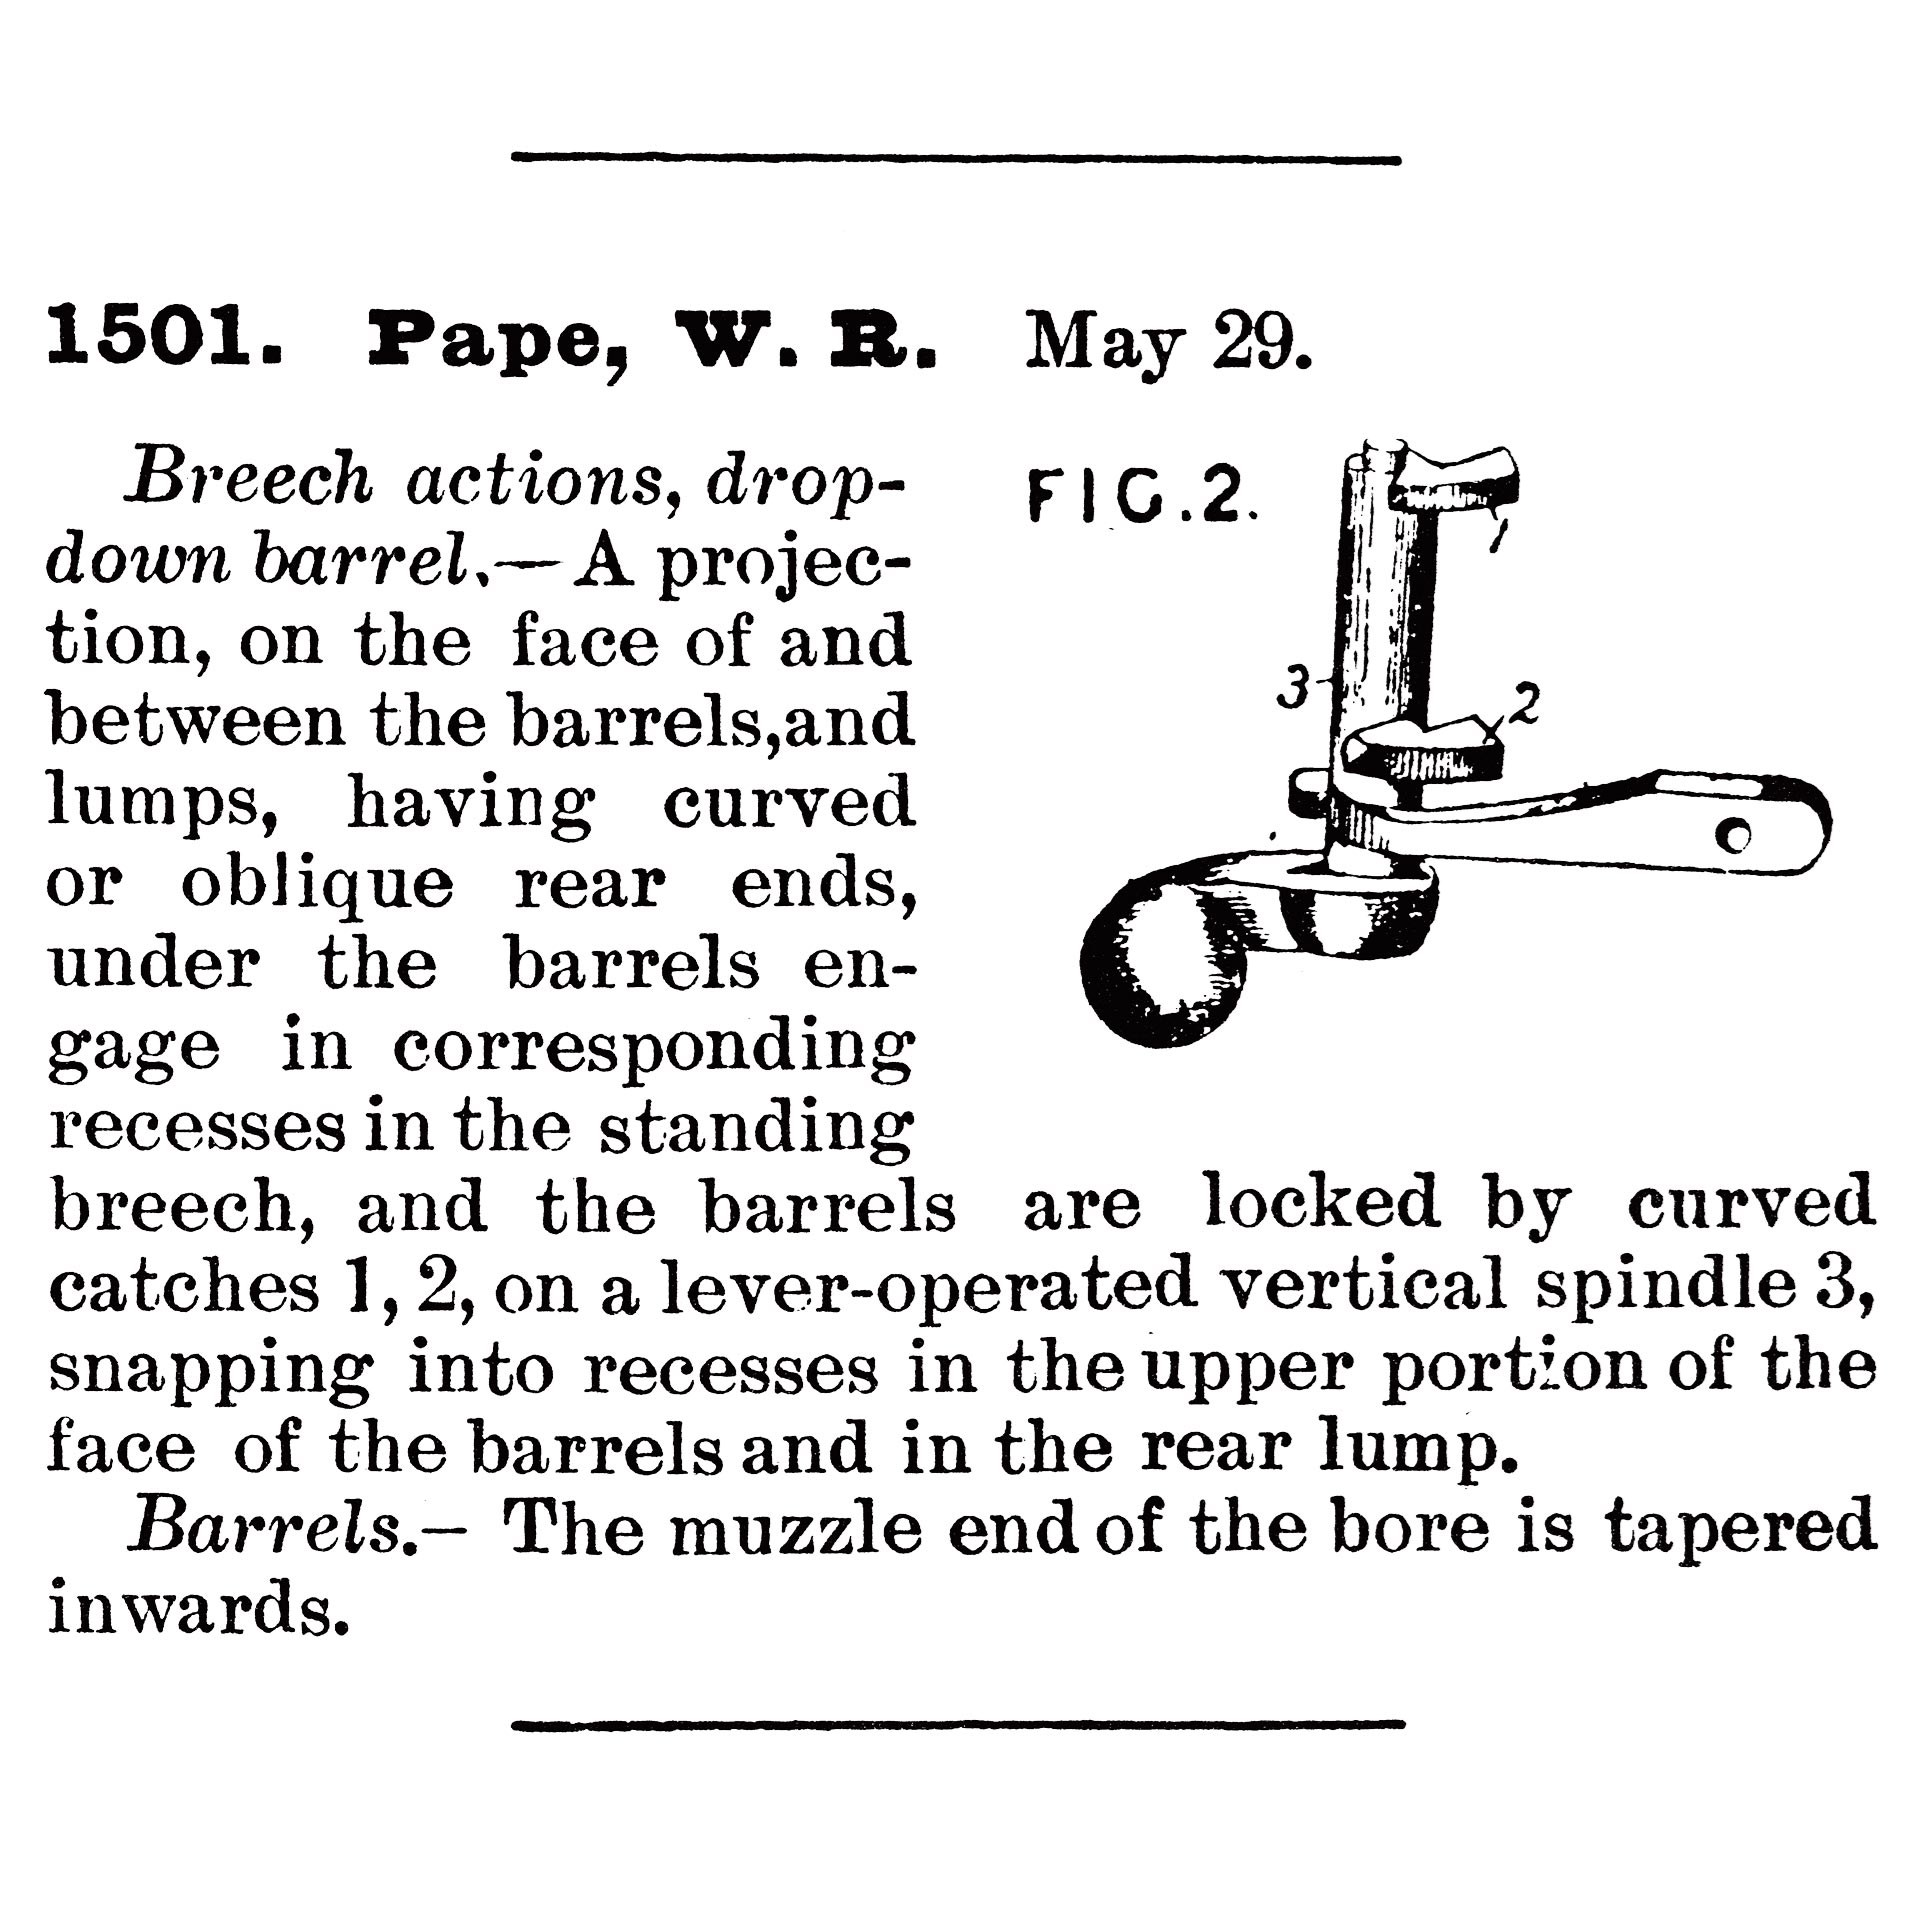 Vintage magazine text image bolt drawing patent may 29 Pape, W.R.